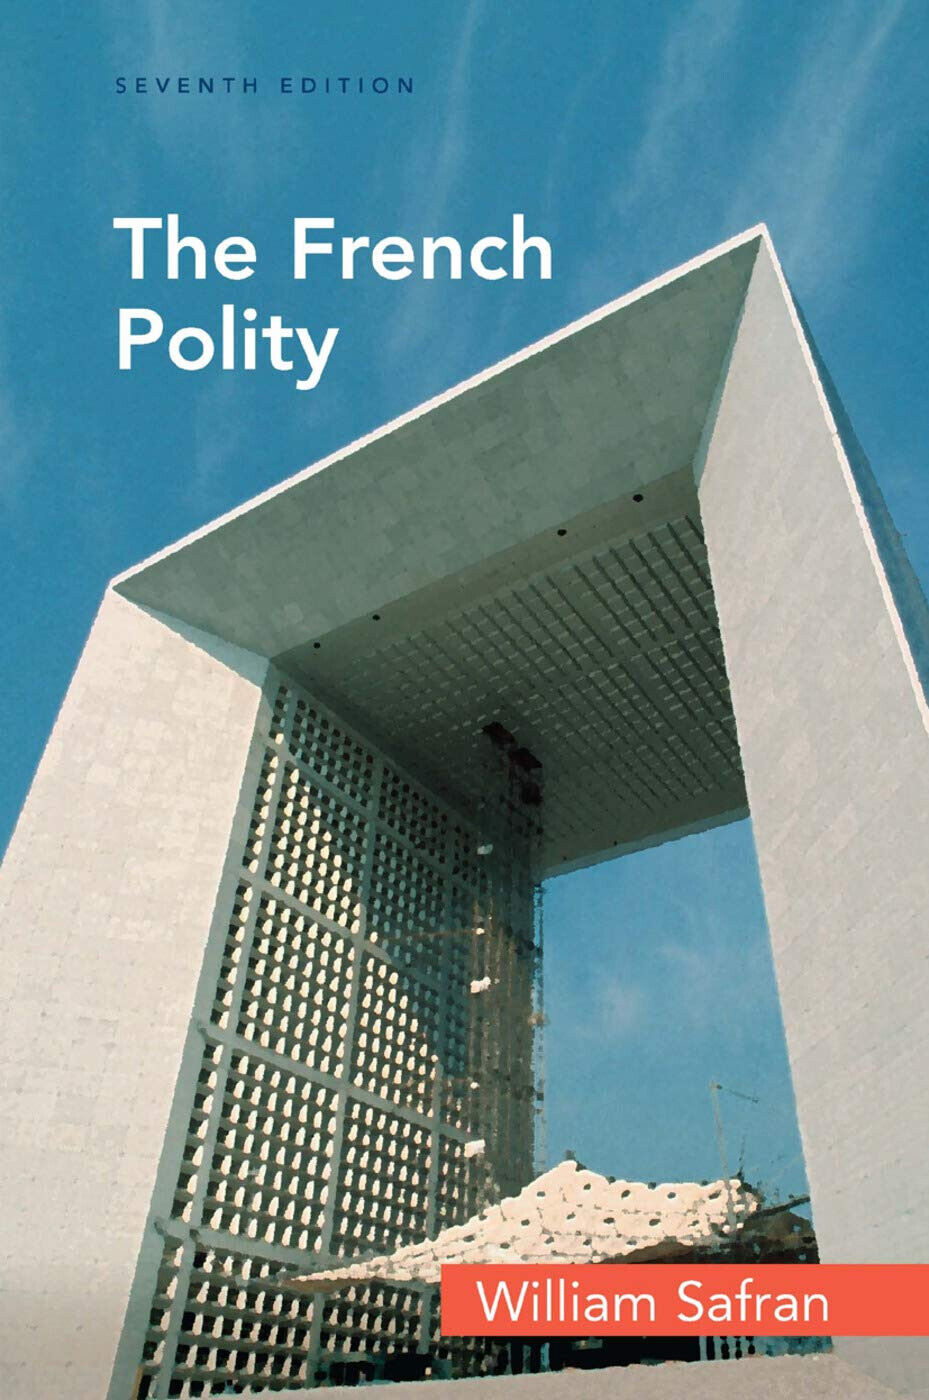 The French Polity - William Safran - Routledge, 2008